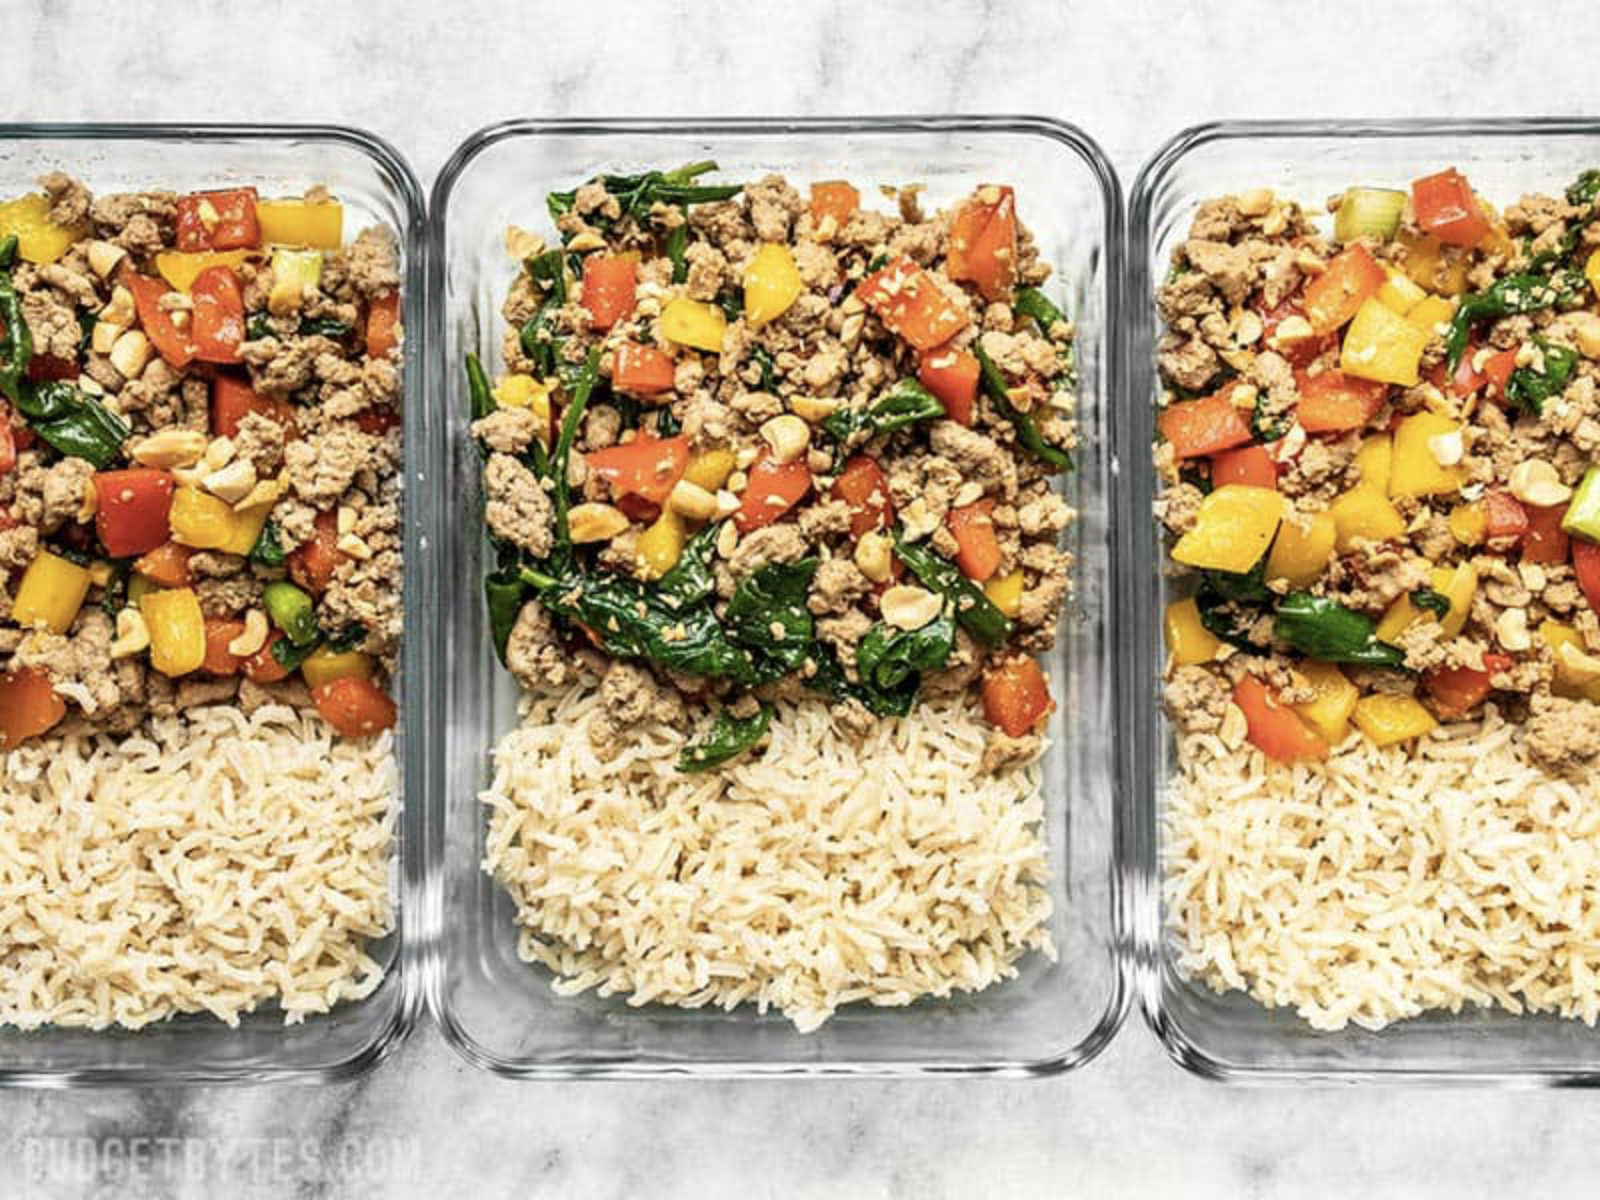 ground turkey stir fry with rice in meal prep containers